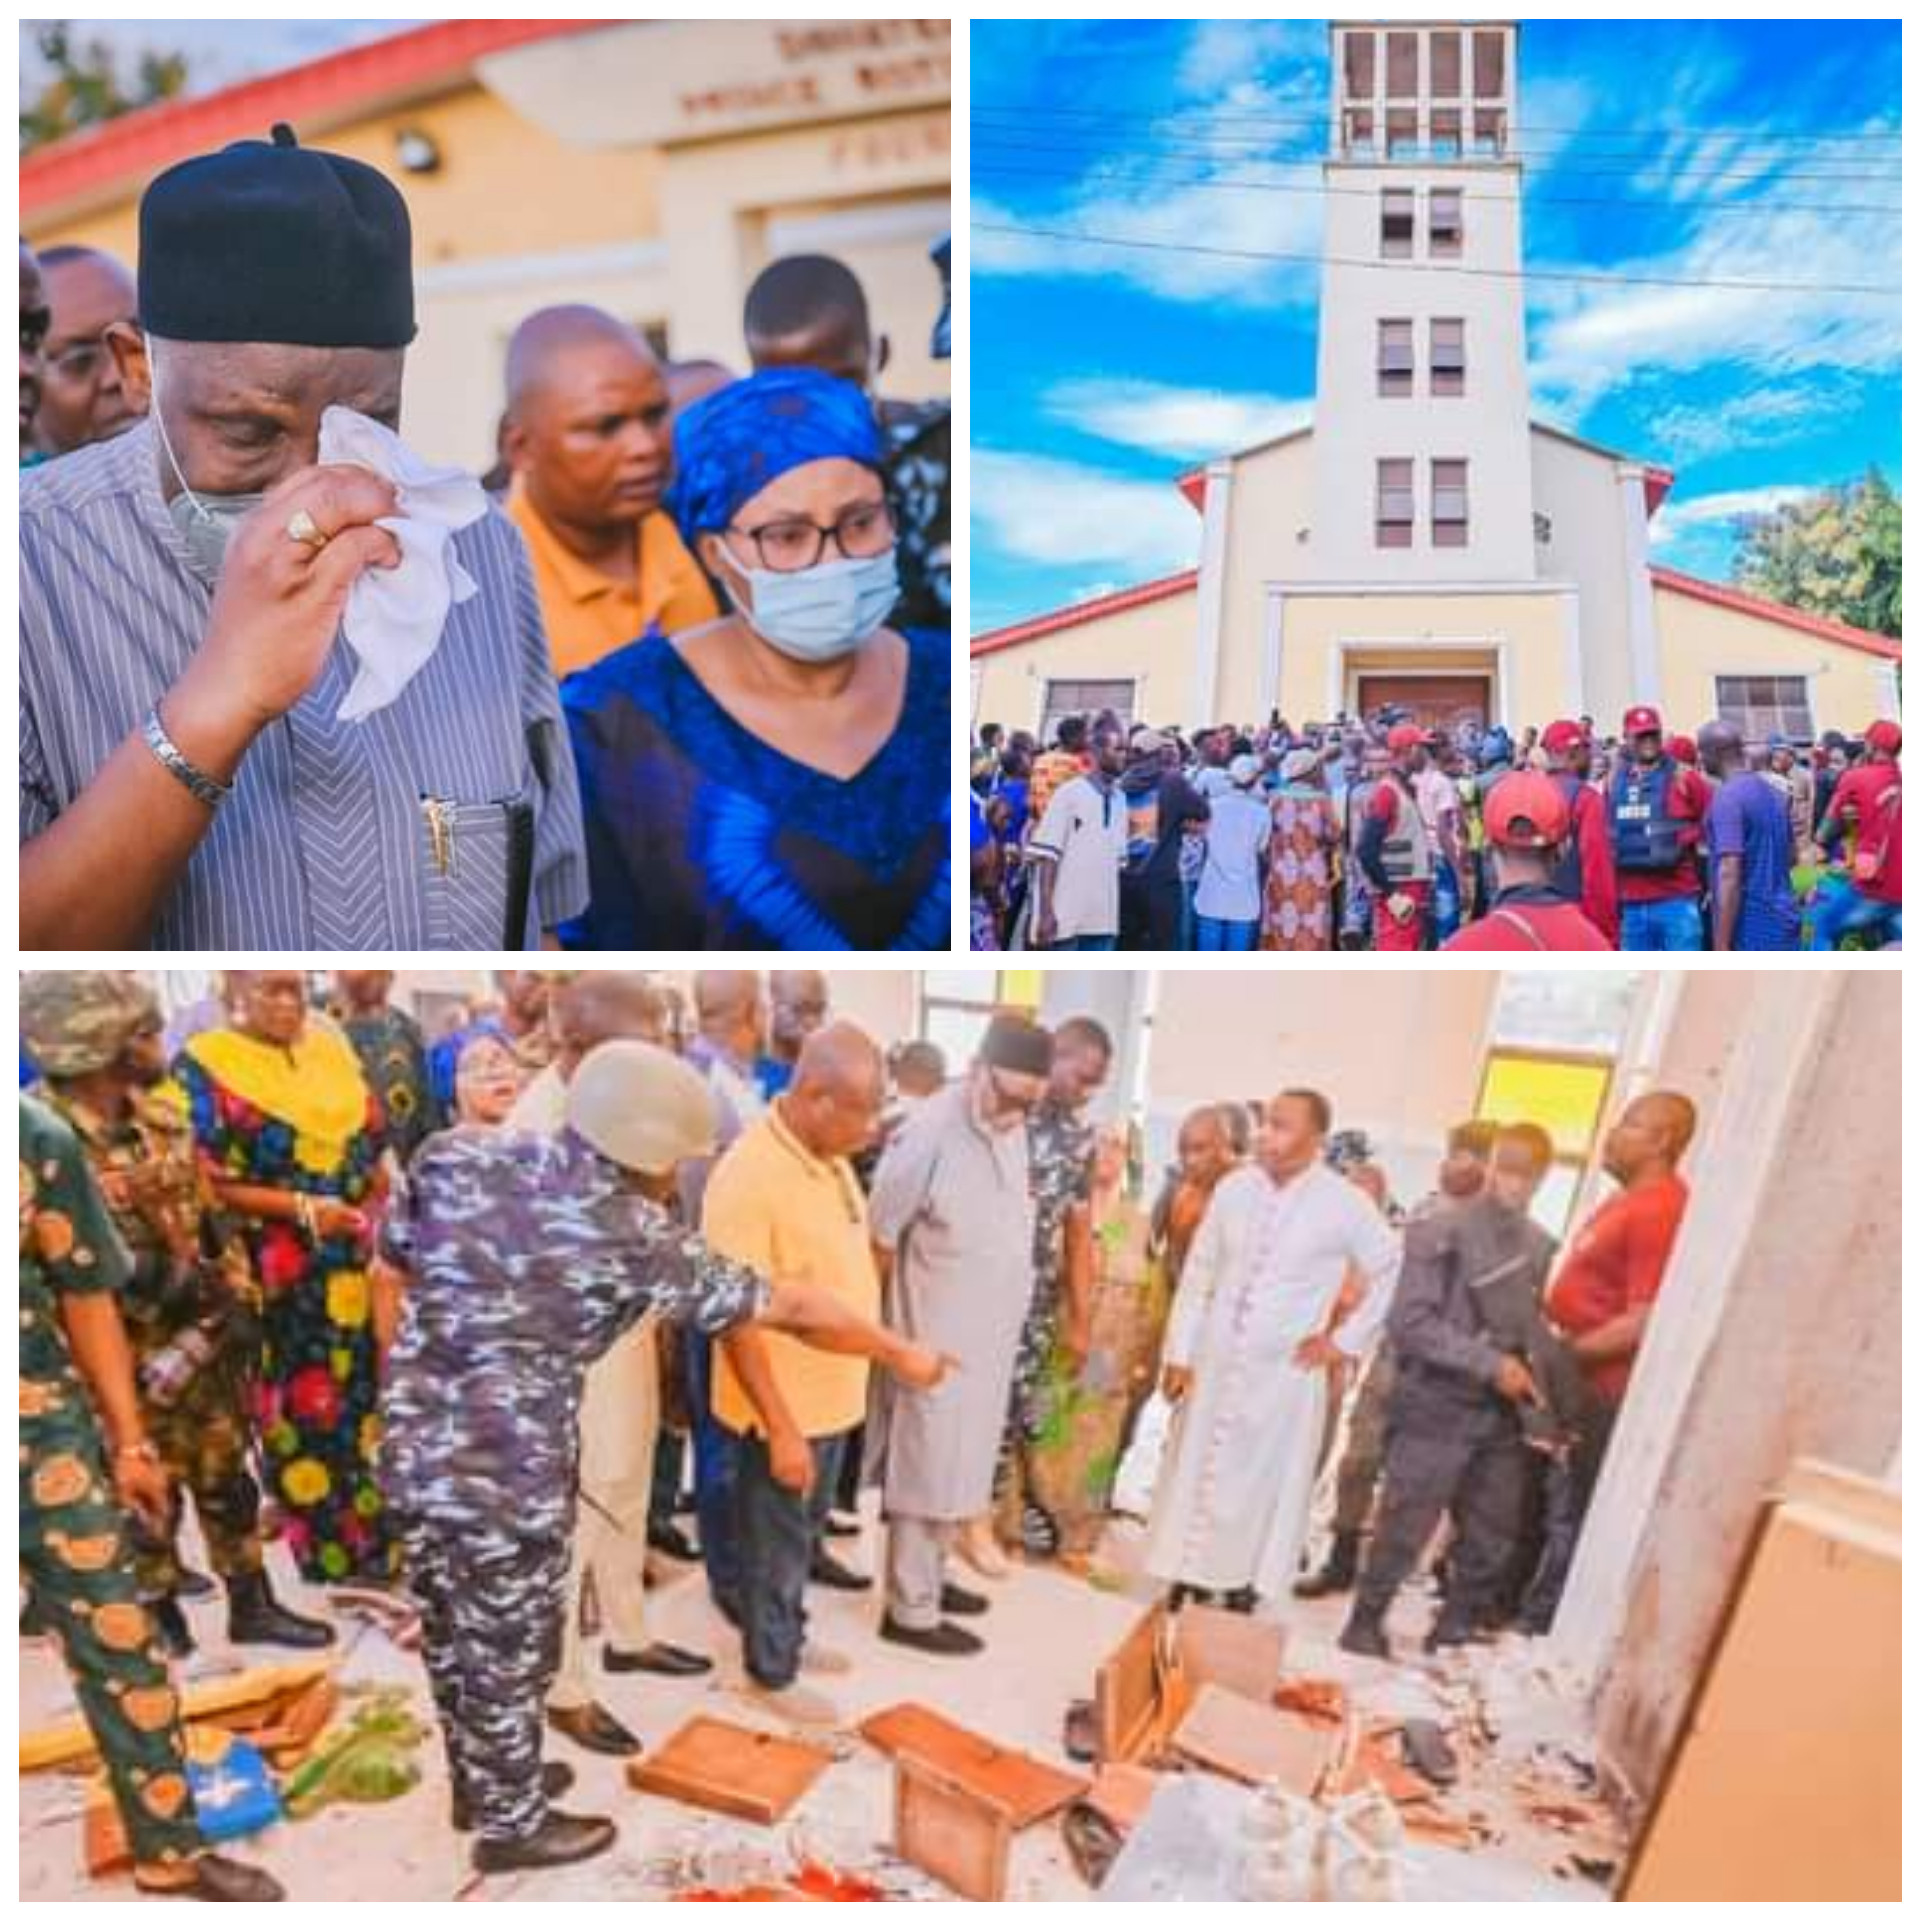 “WHAT WE HAVE SEEN IN AMERICA IS A CHILD PLAY TO WHAT HAPPENED HERE” – GOVERNOR AKEREDOLU VISITS SCENE OF OWO TERROR ATTACK